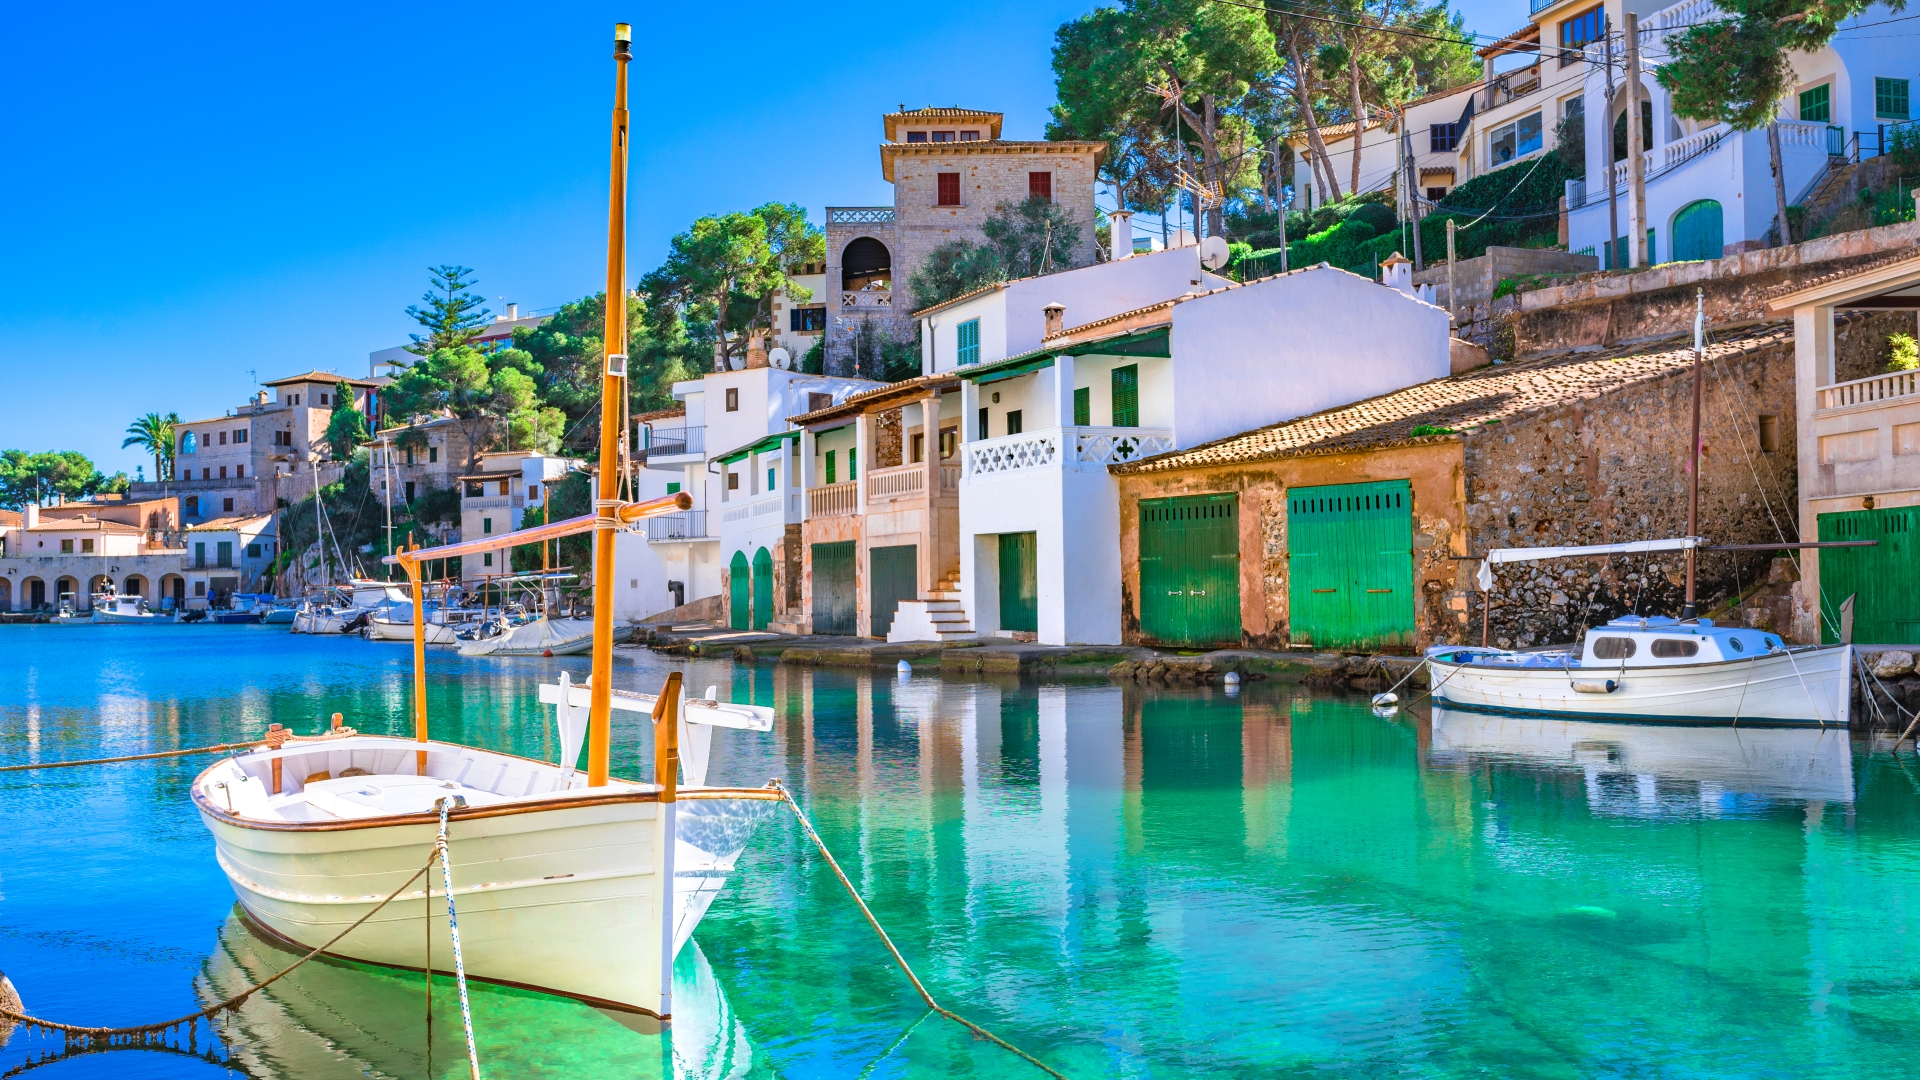 Save £300 on your next Marella Cruise with destinations including the Med and Caribbean